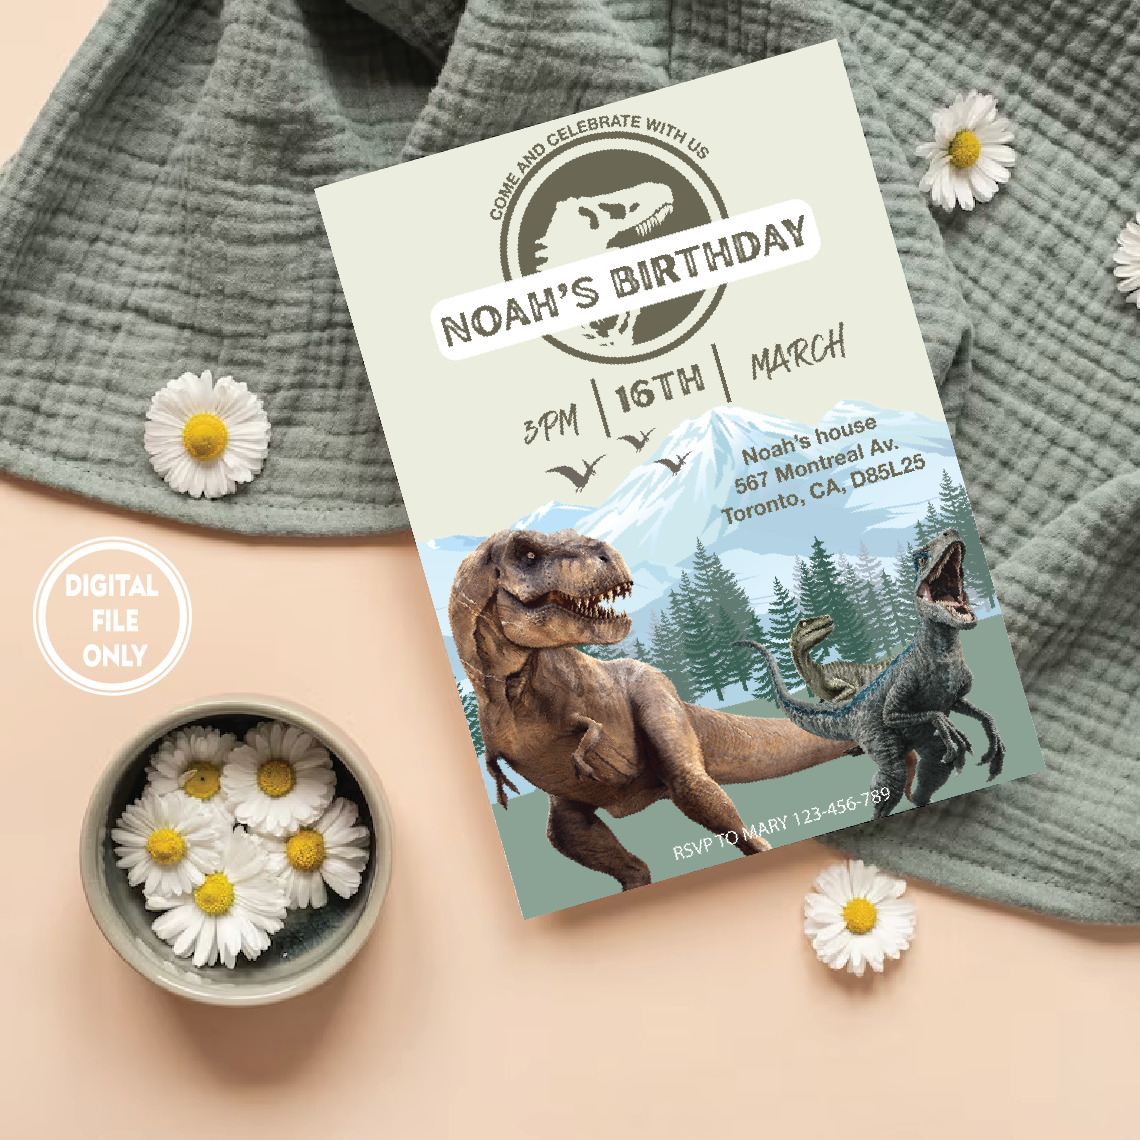 Personalized File Jurassic World Birthday Invitation Dinosaur Birthday Invitation, Invitation Instant Download PNG File Only